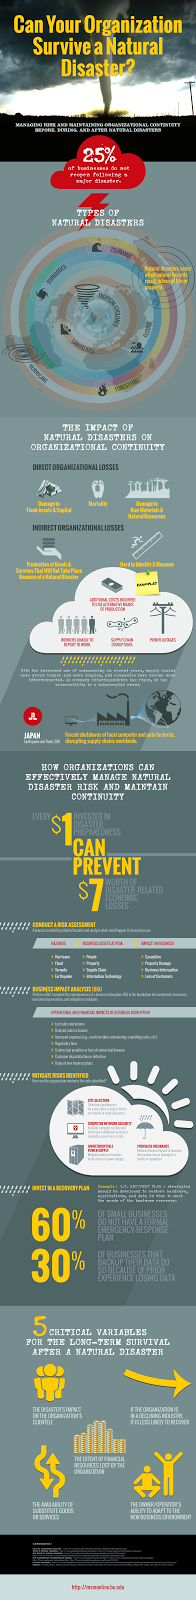 CAN YOUR ORGANIZATION SURVIVE A NATURAL DISASTER?